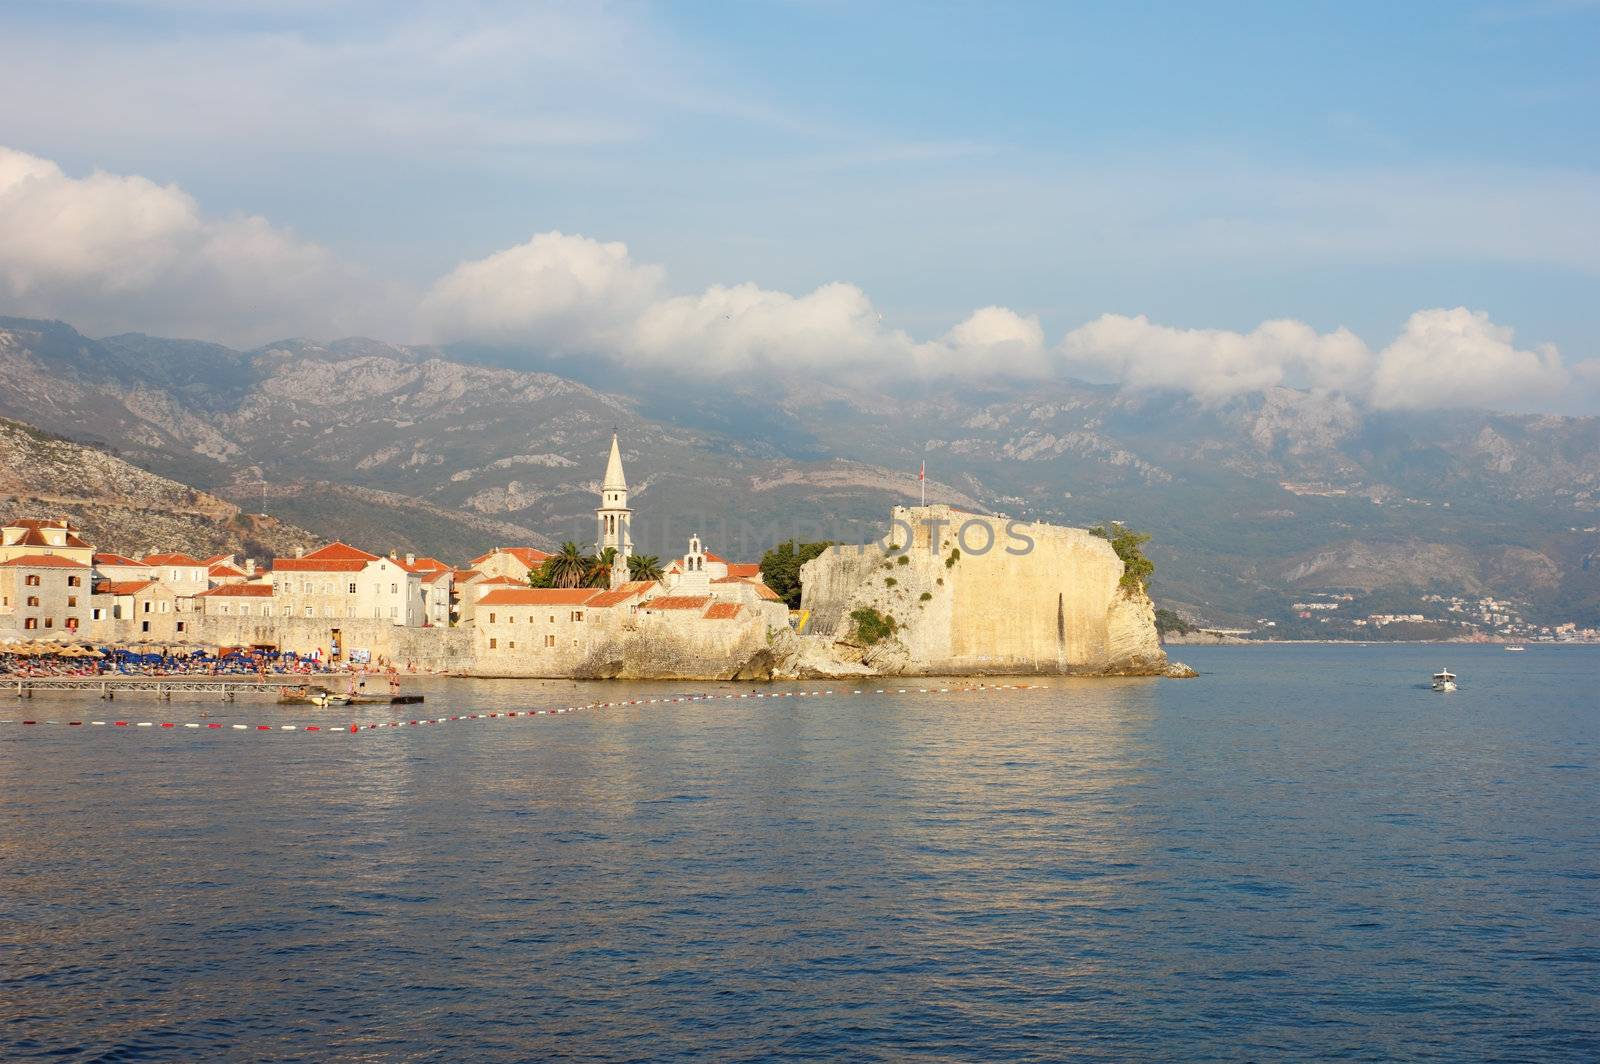 Panoramic view toward the old part of Budva in Montenegro, shot in the warm light of the late afternoon.